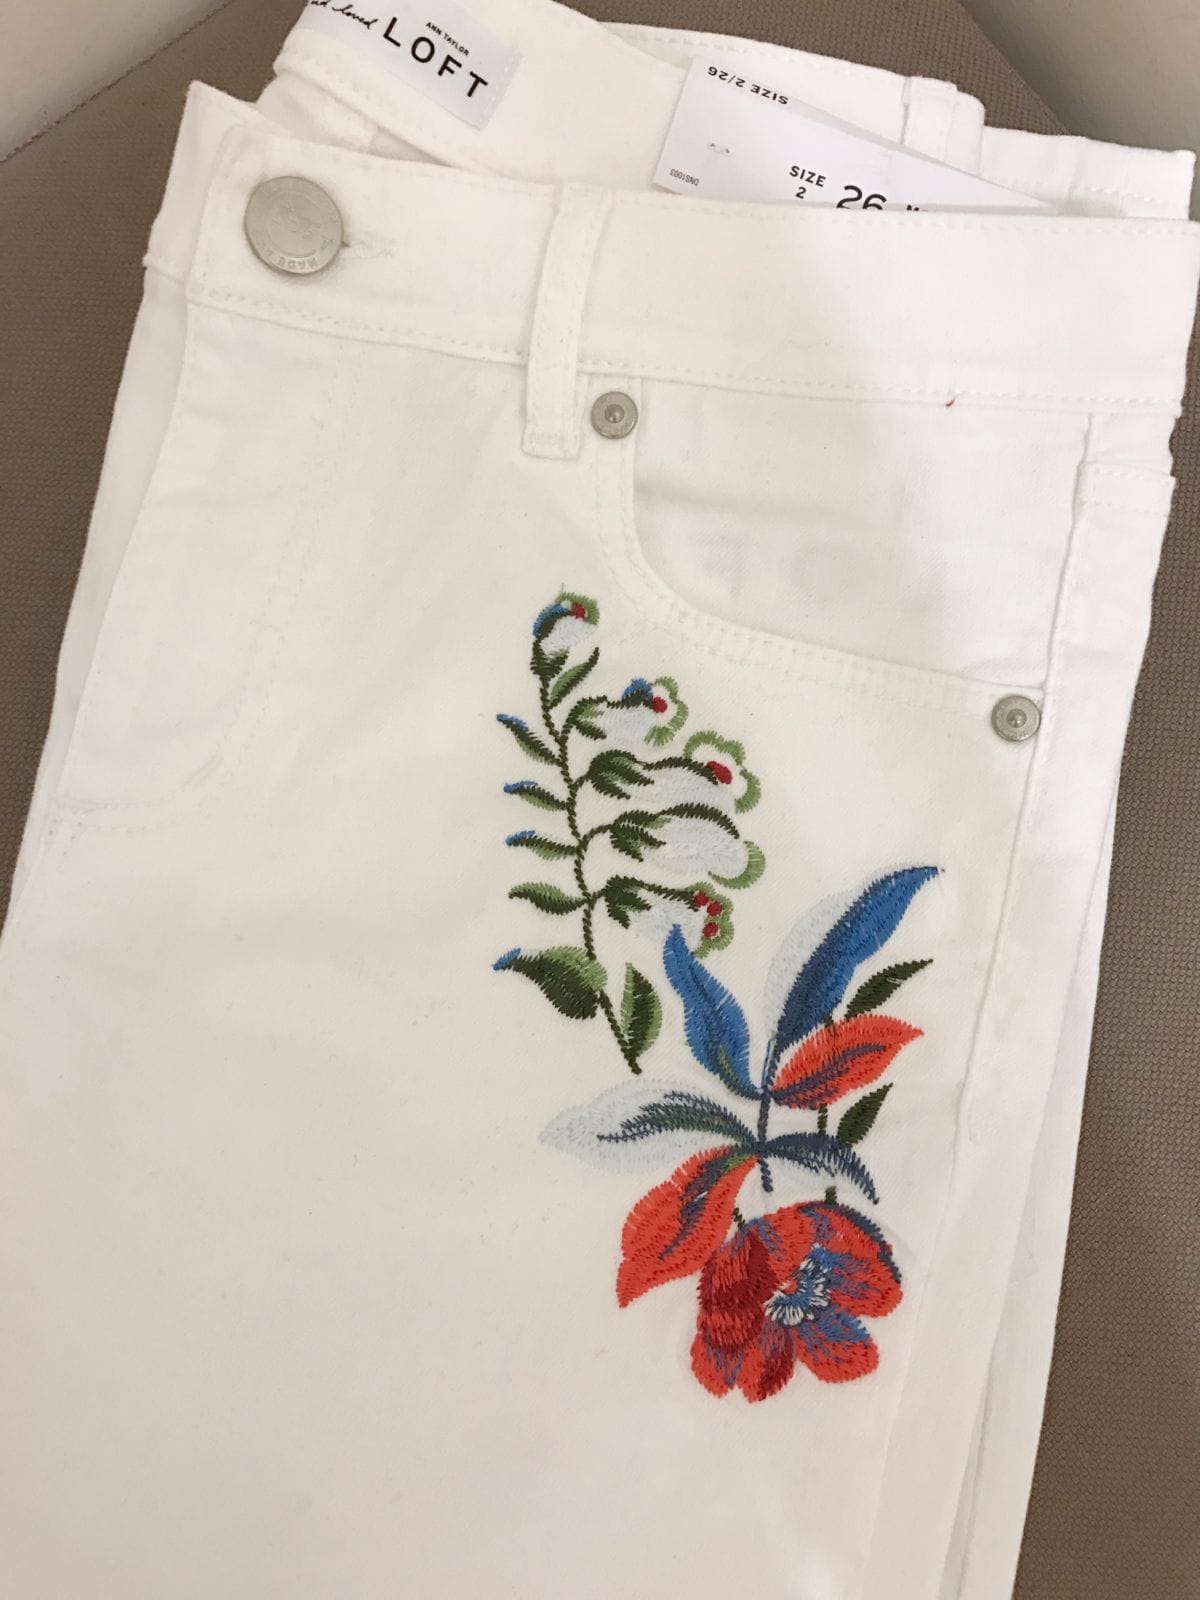 white floral jeans